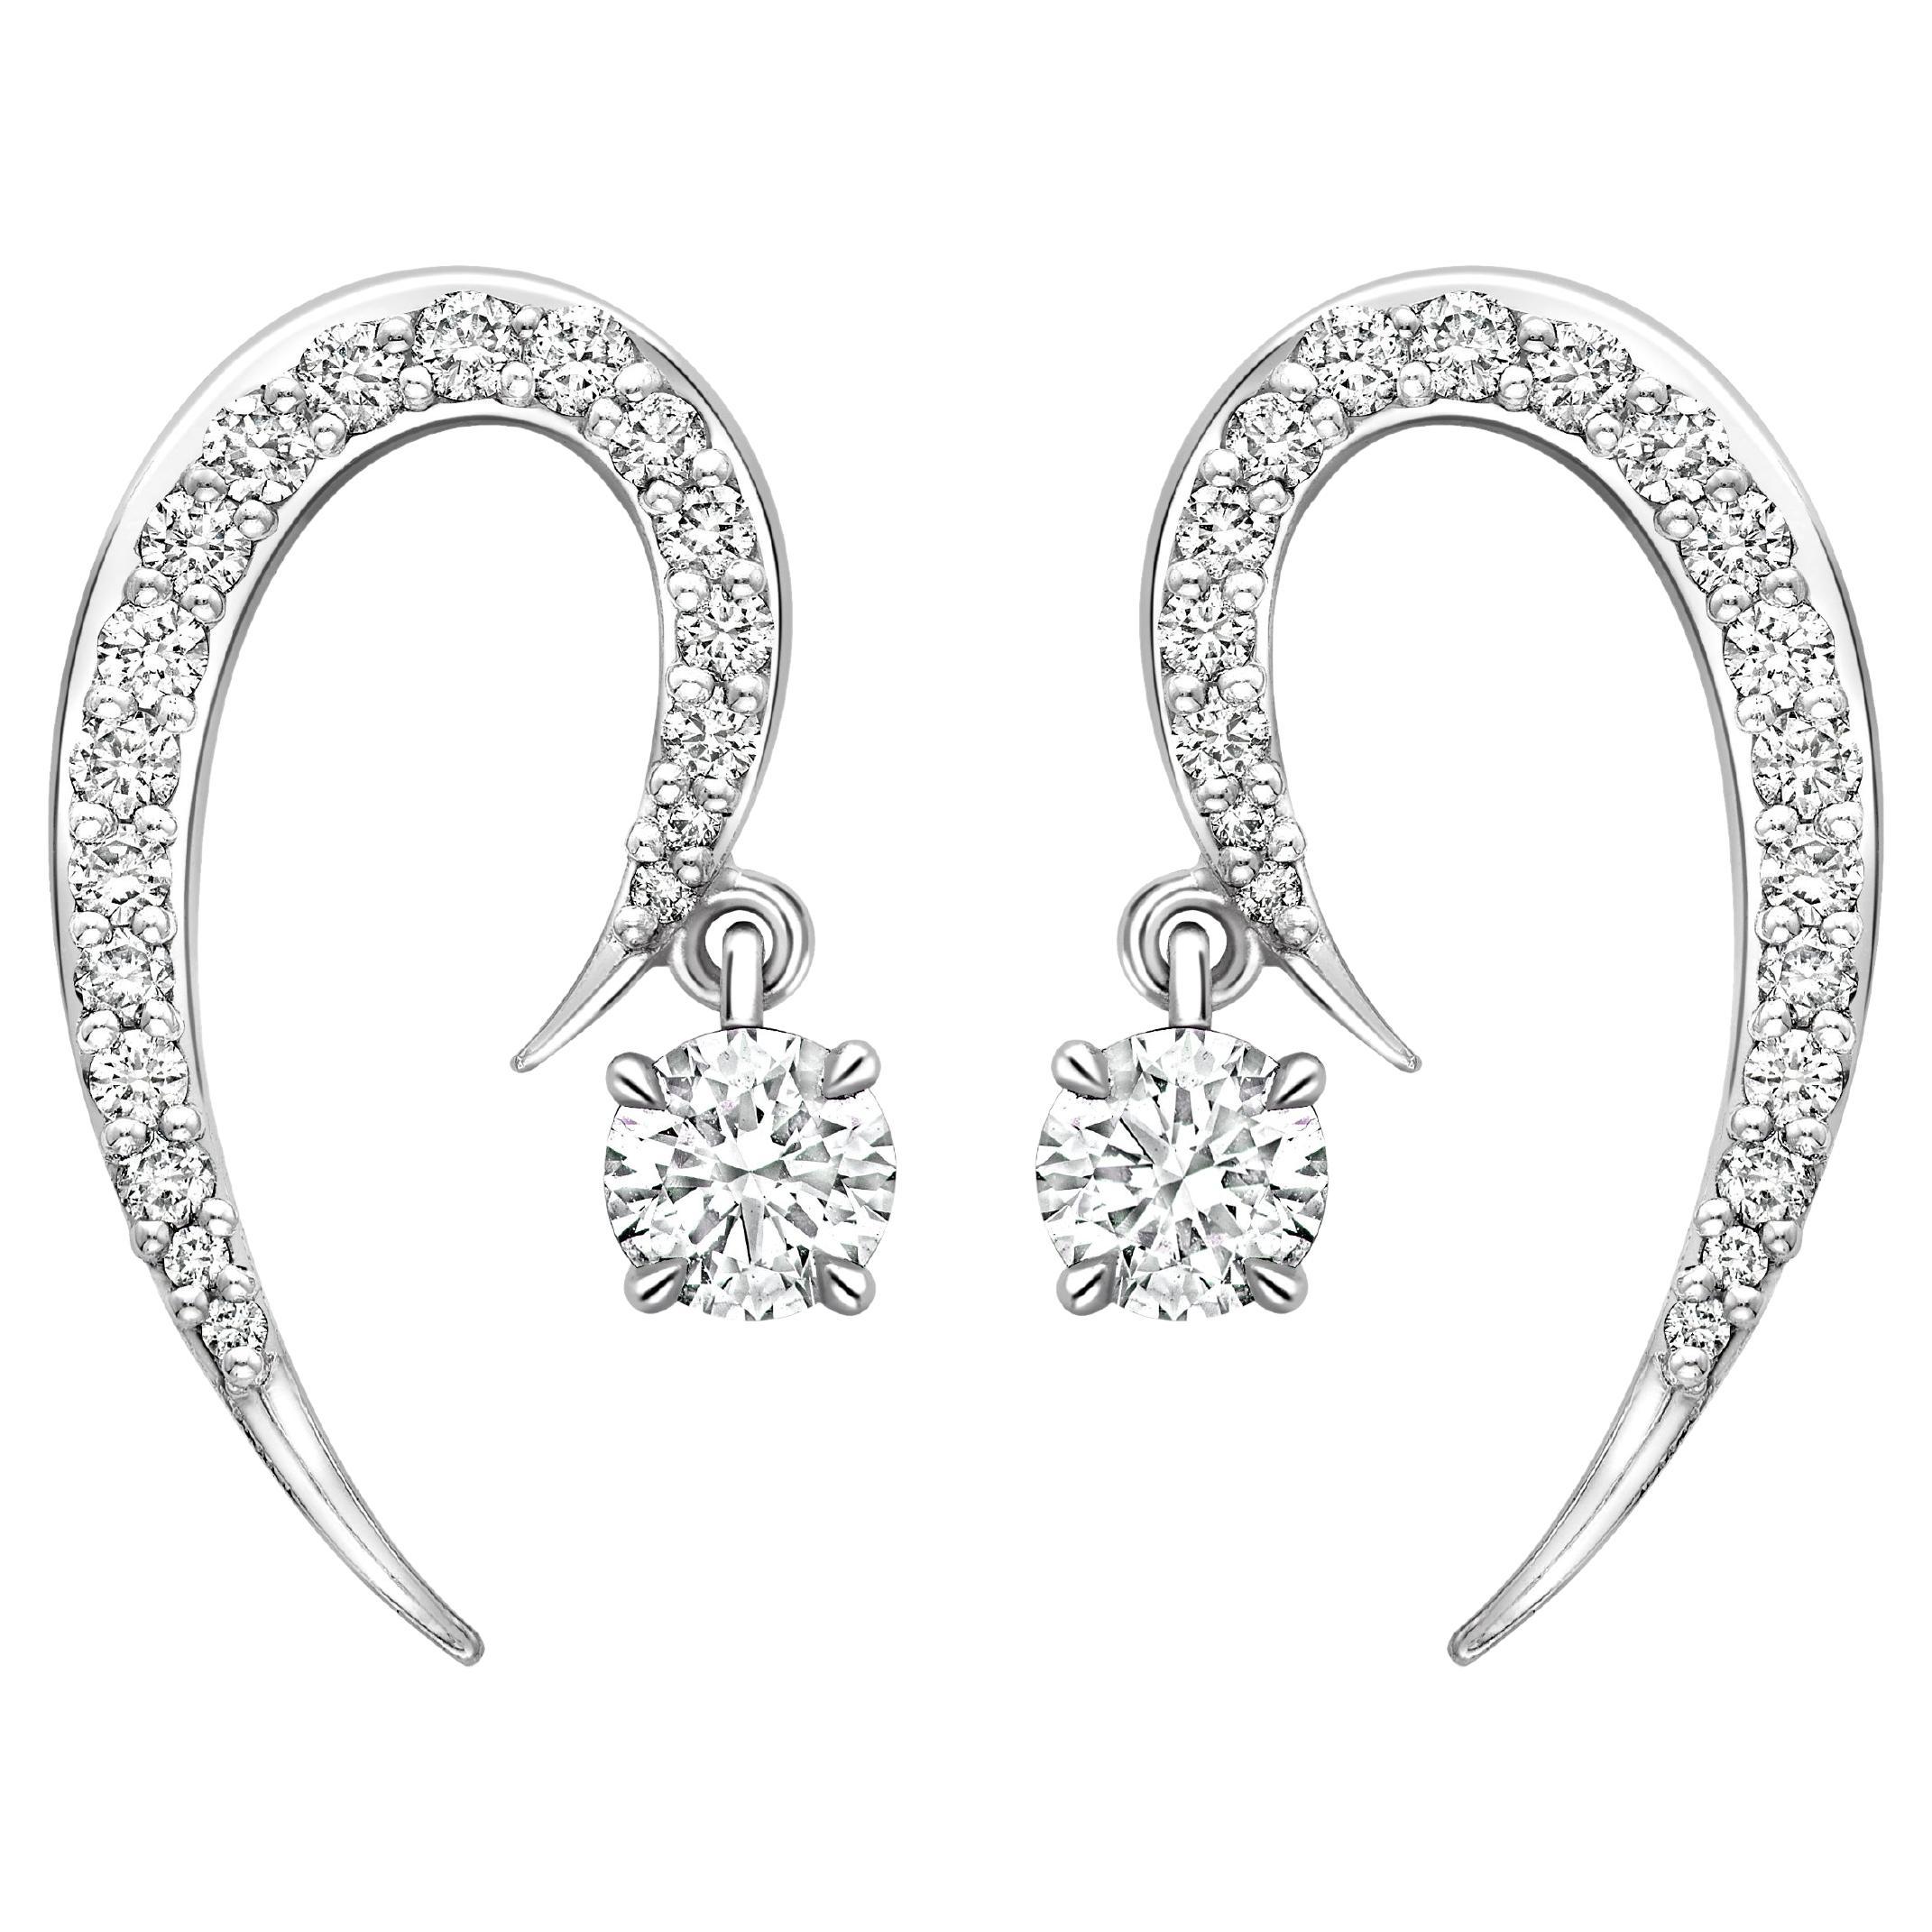 CURVE EARRINGS White gold with white diamonds by Liv Luttrell